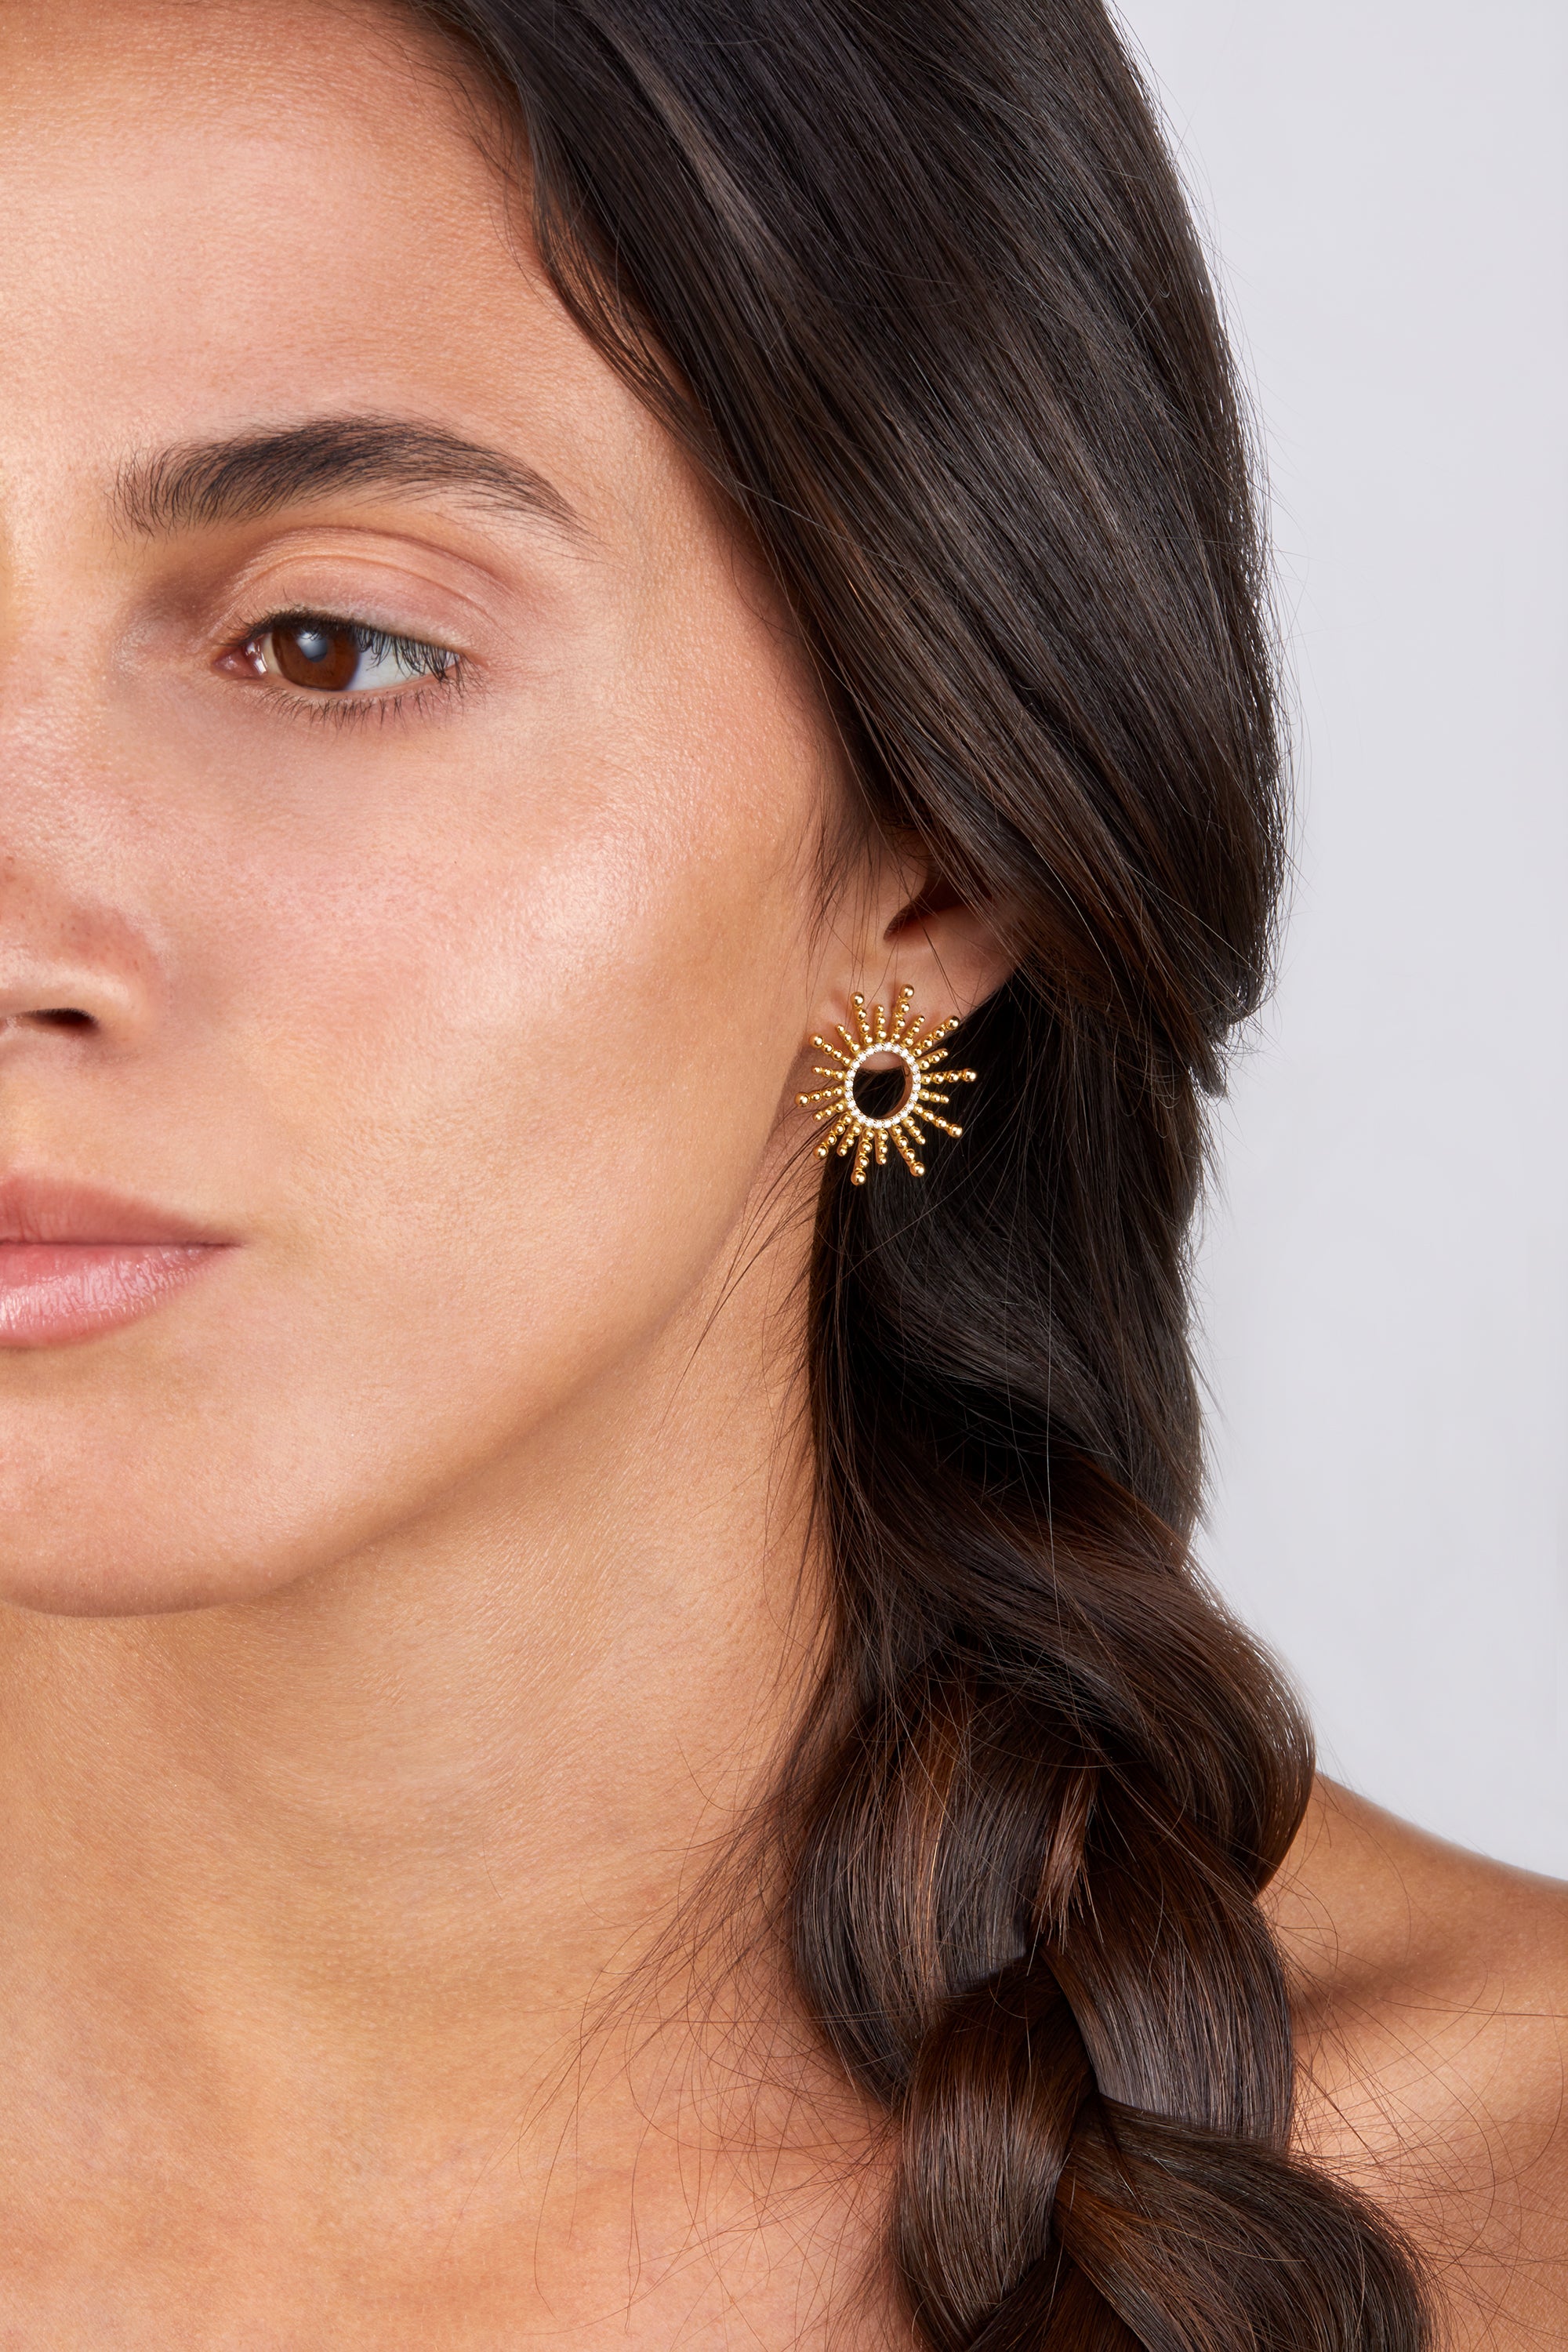 Sea urchin-inspired yellow gold earrings with diamonds, showcased on model